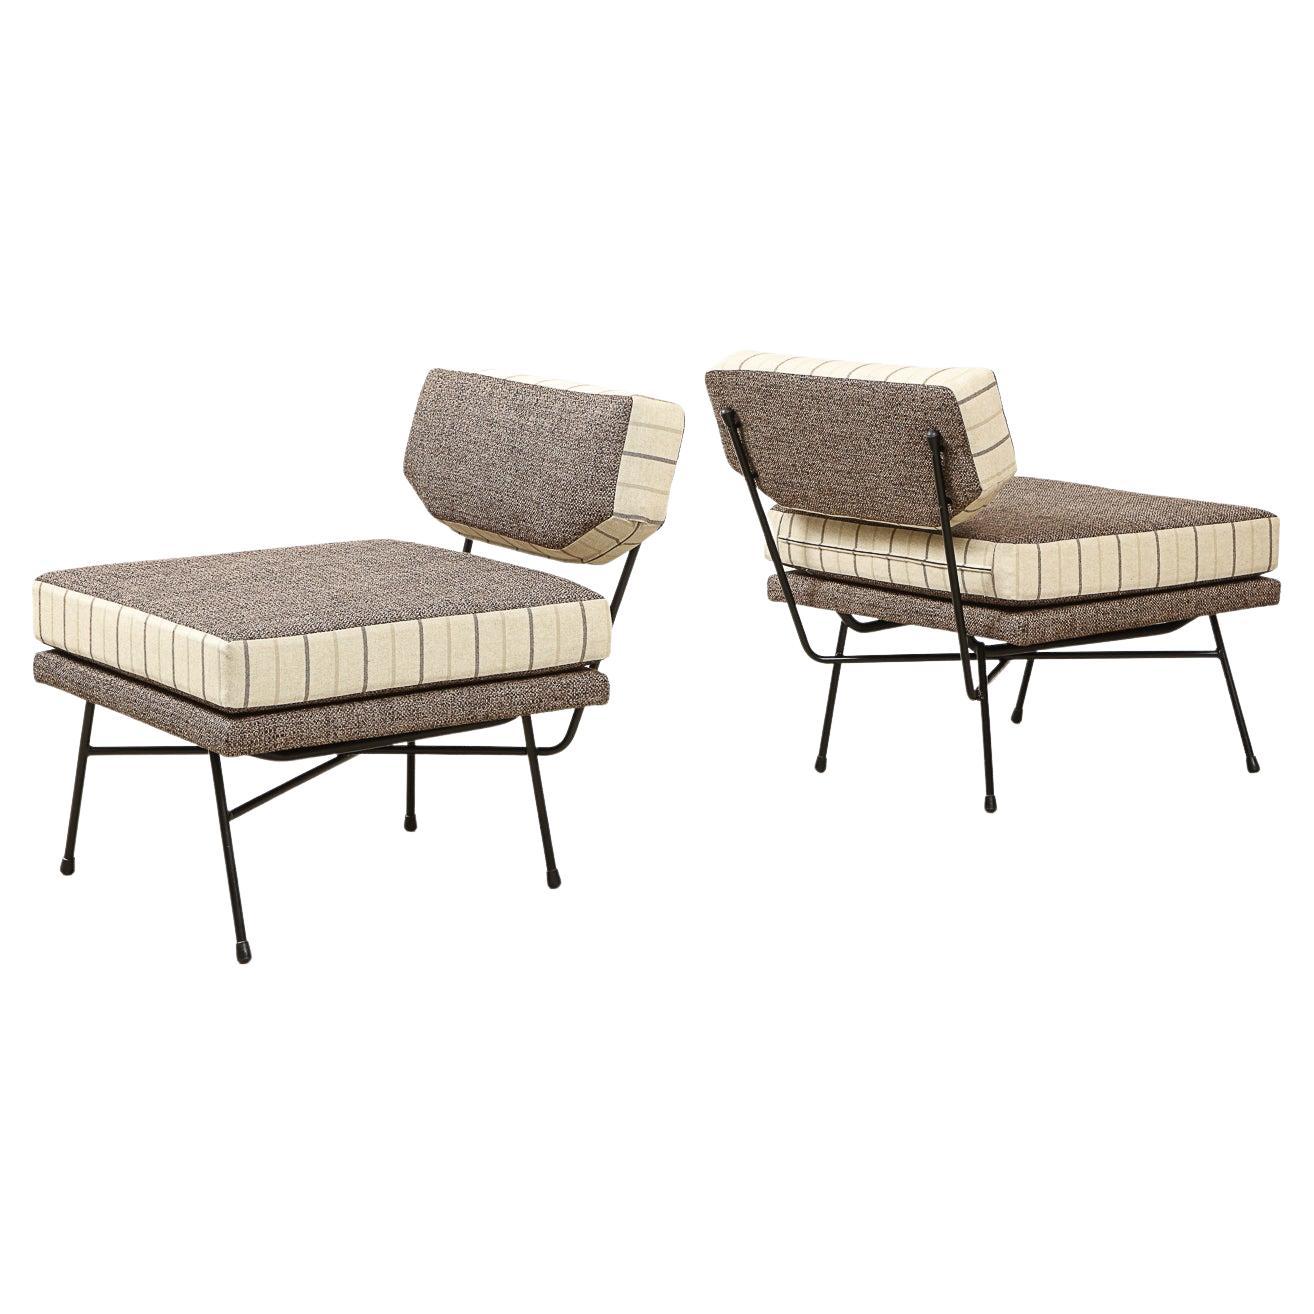 Rare Pair of Elettra Lounge Chairs by Studio BBPR for Arflex